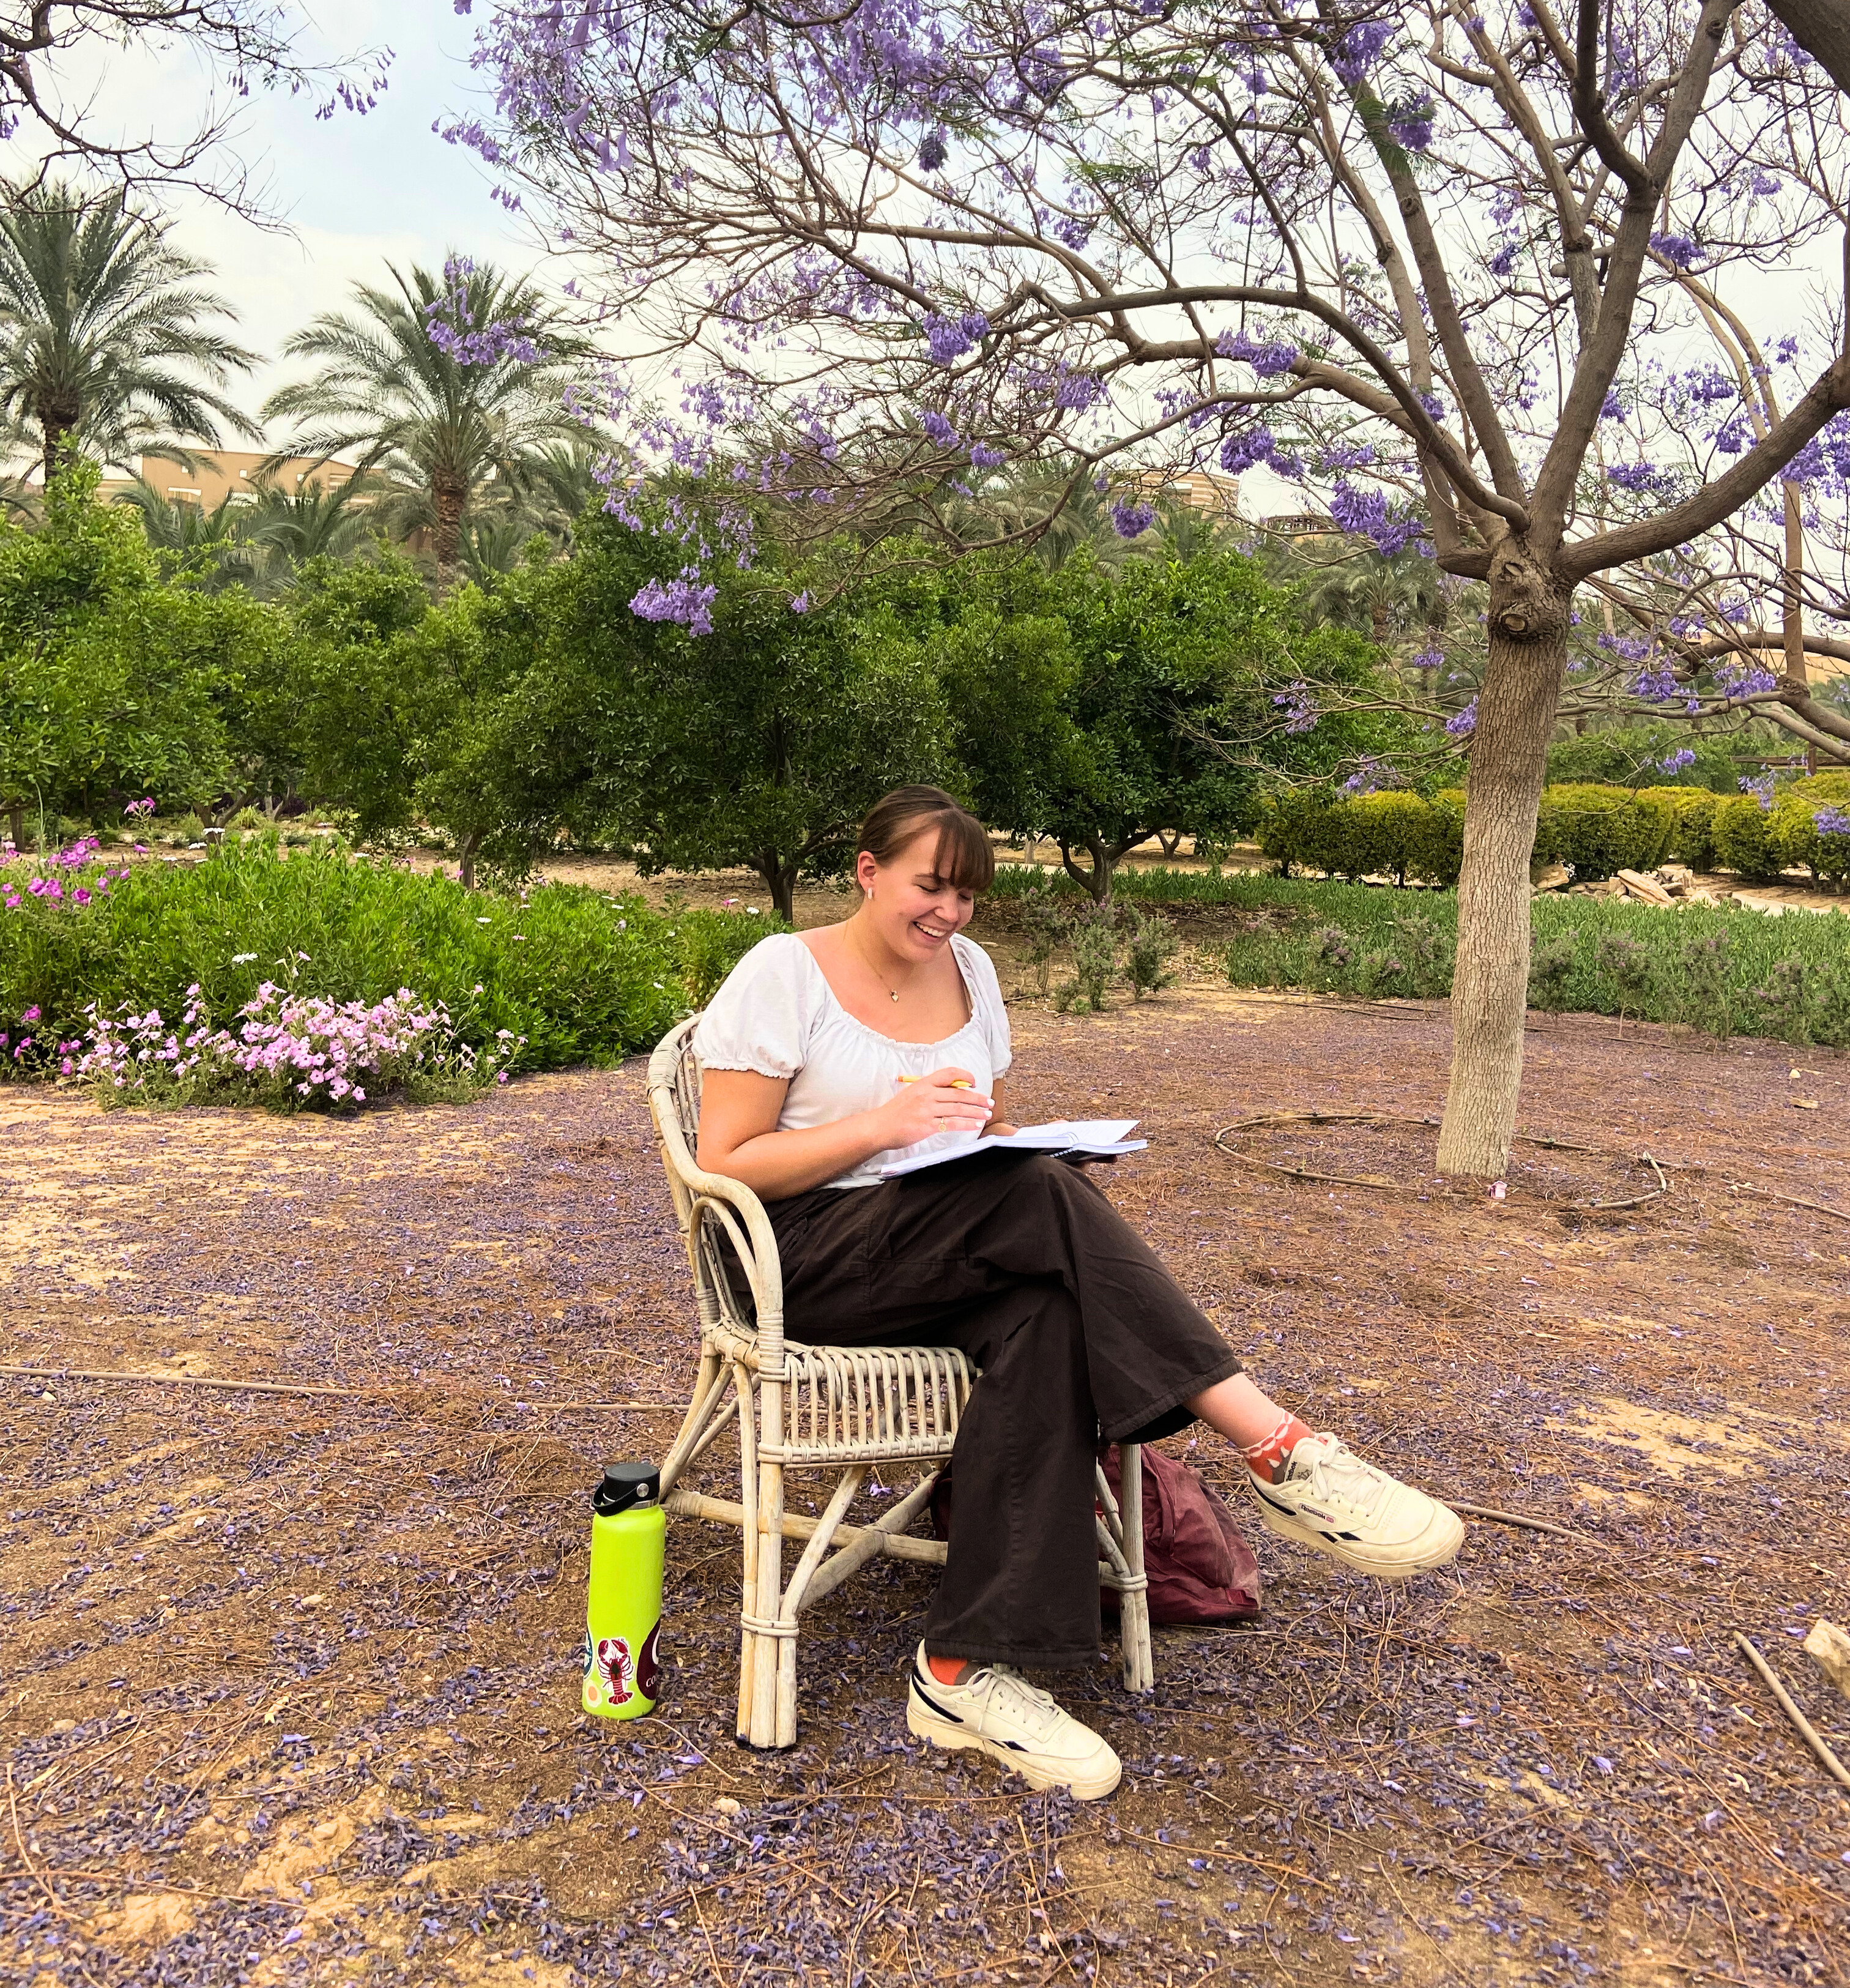 Corson sits under two flowering purple trees in the garden. She is writing in a notebook and there is a green water bottle near her chair. The rest of the garden and the Administration Building is visible in the background. 